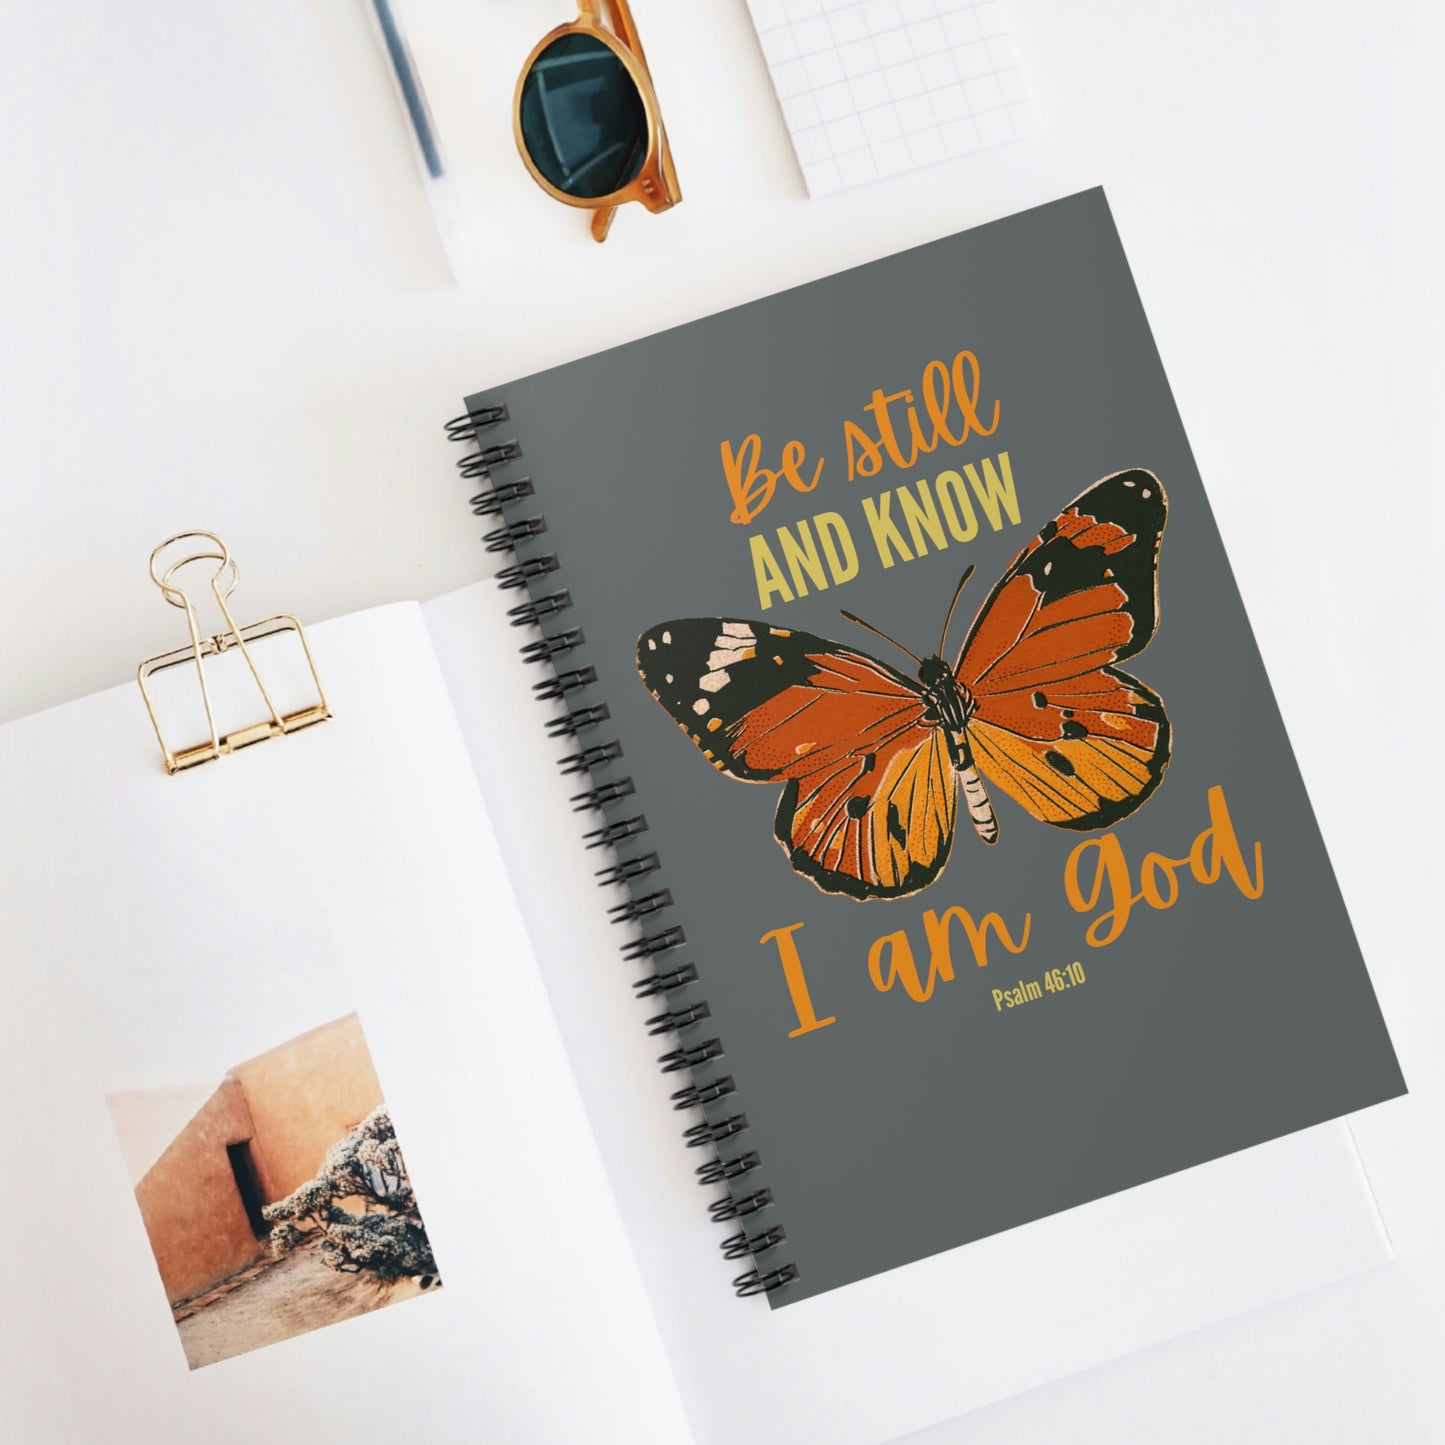 Psalm 46:10 Be Still And Know I am God, Blank Notebook, Prayer Journal, Bible Study Notebook, Faith Diary, Spiral Notebook - Ruled Line